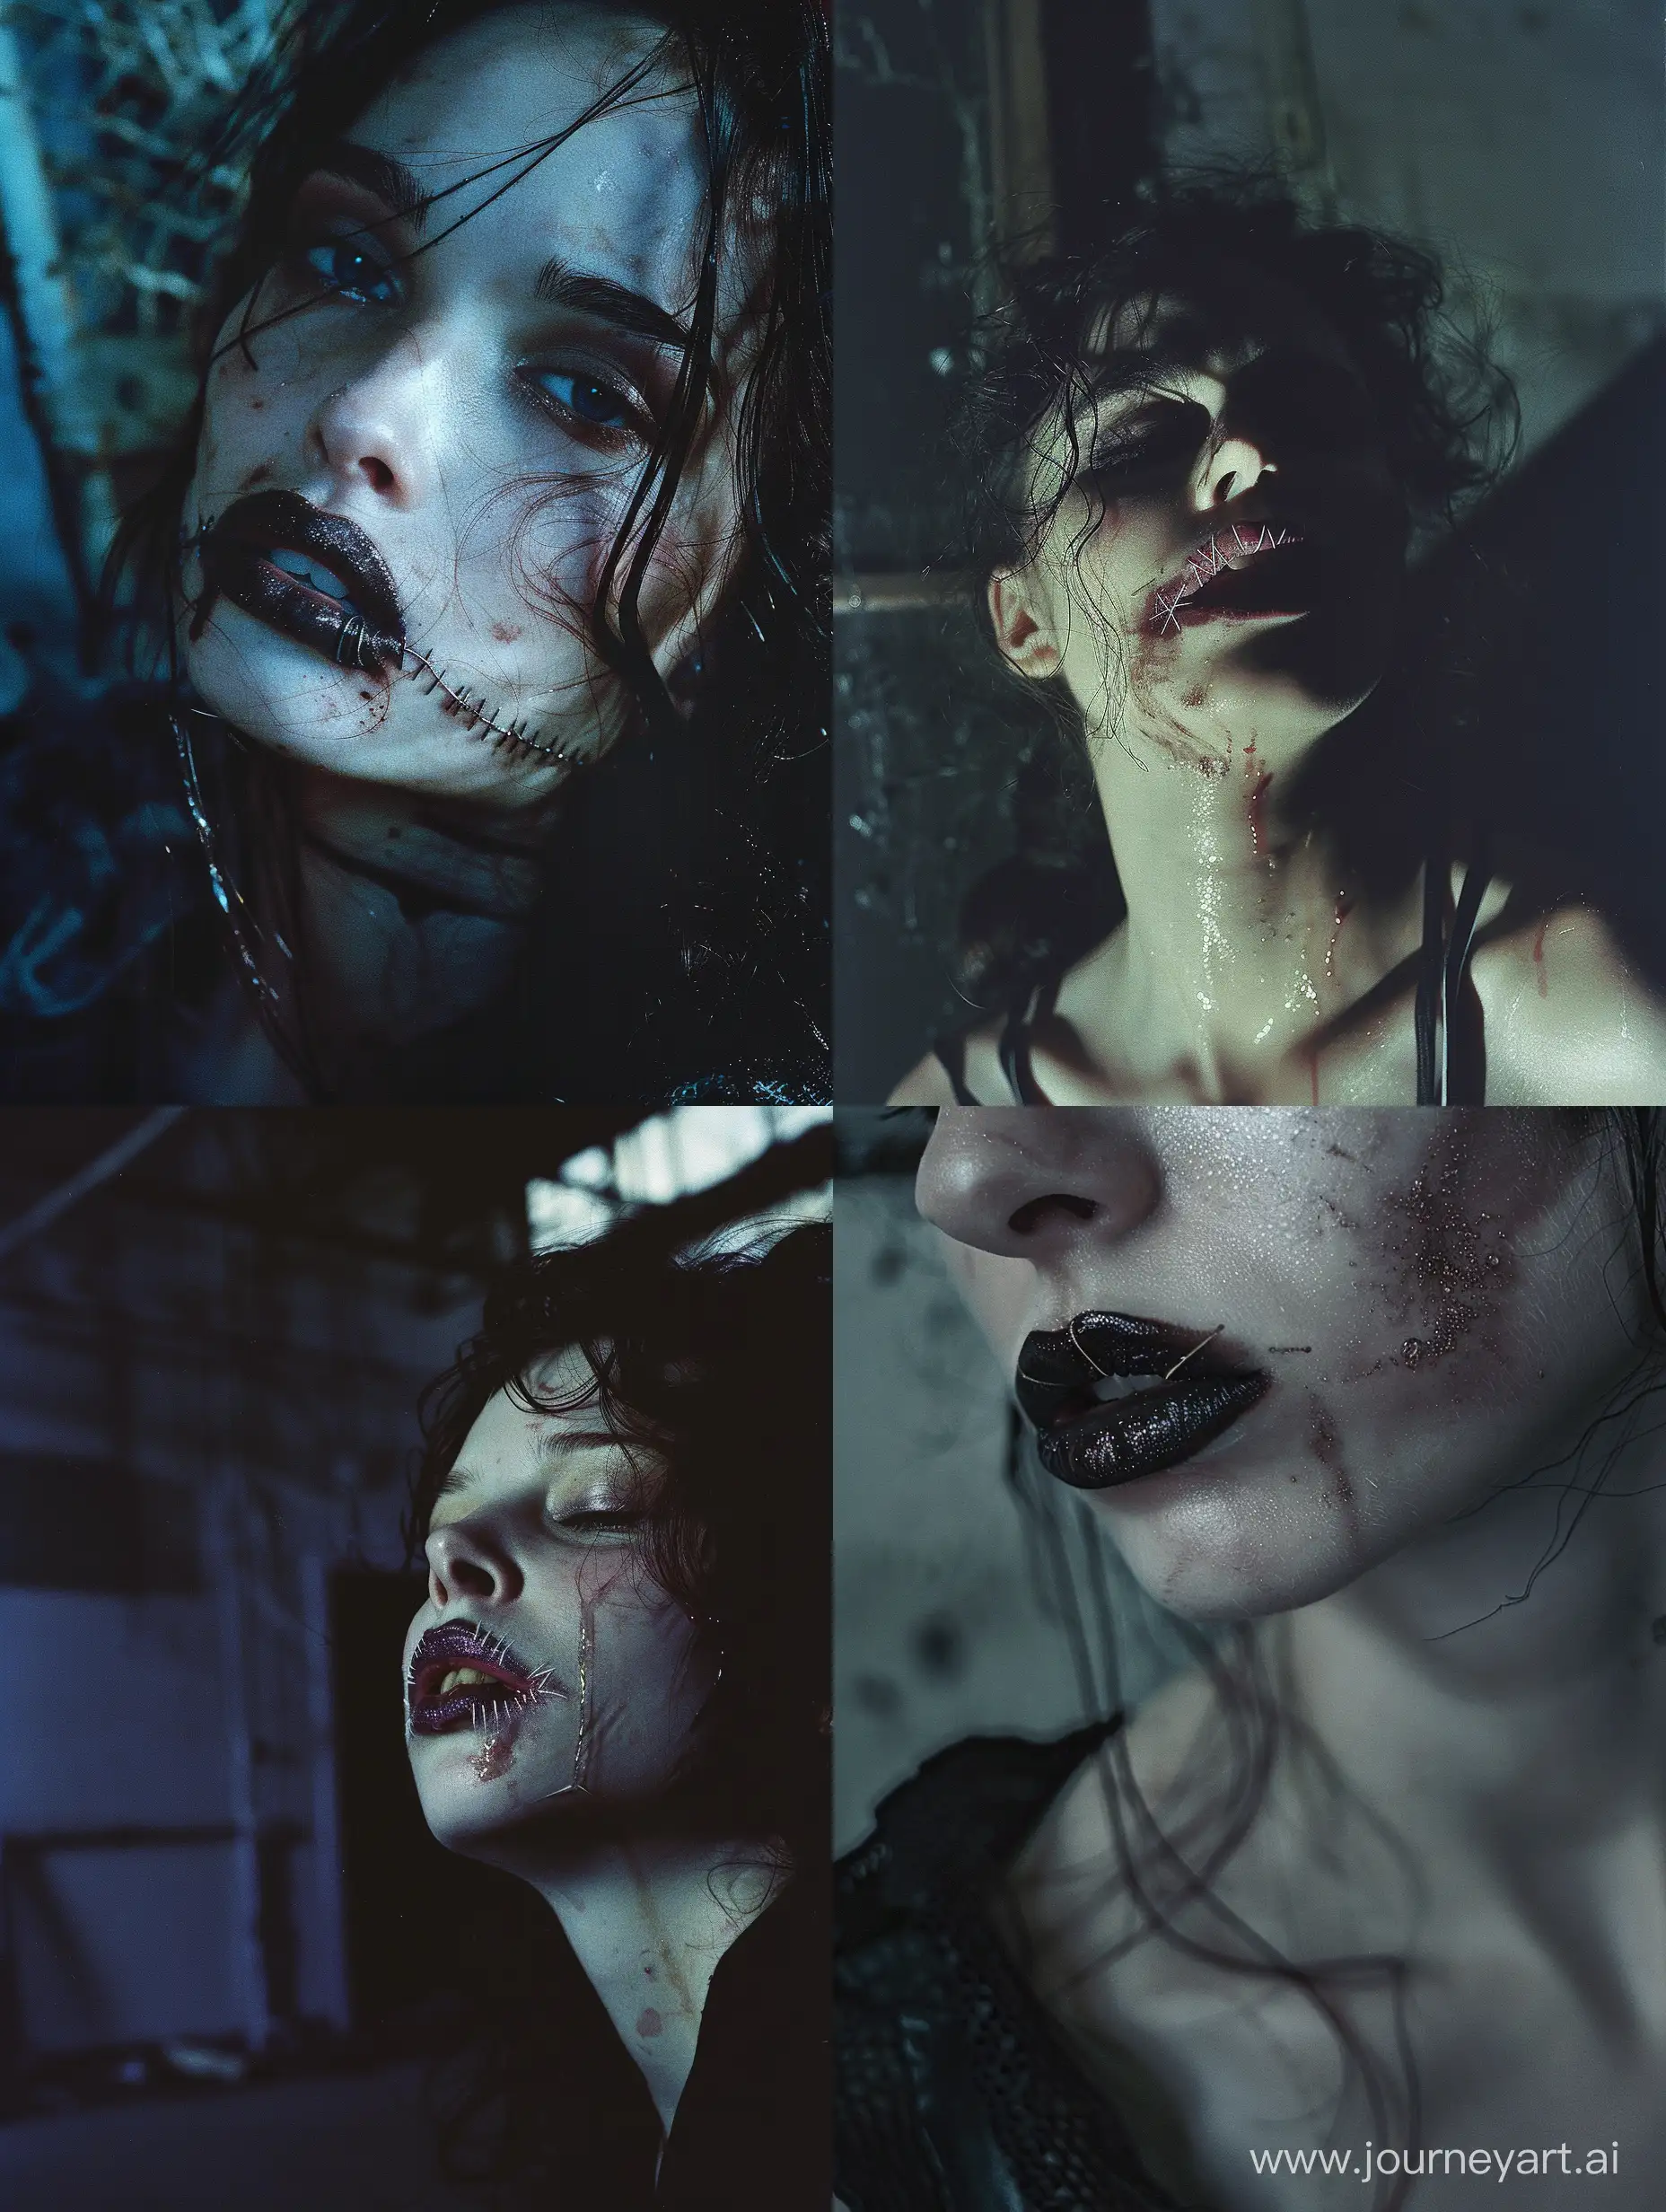 Her top lip and bottom lip have been stitched together, makeup smudged, tear stained face, night scene, dark horror, taken on Provia, abandoned warehouse 